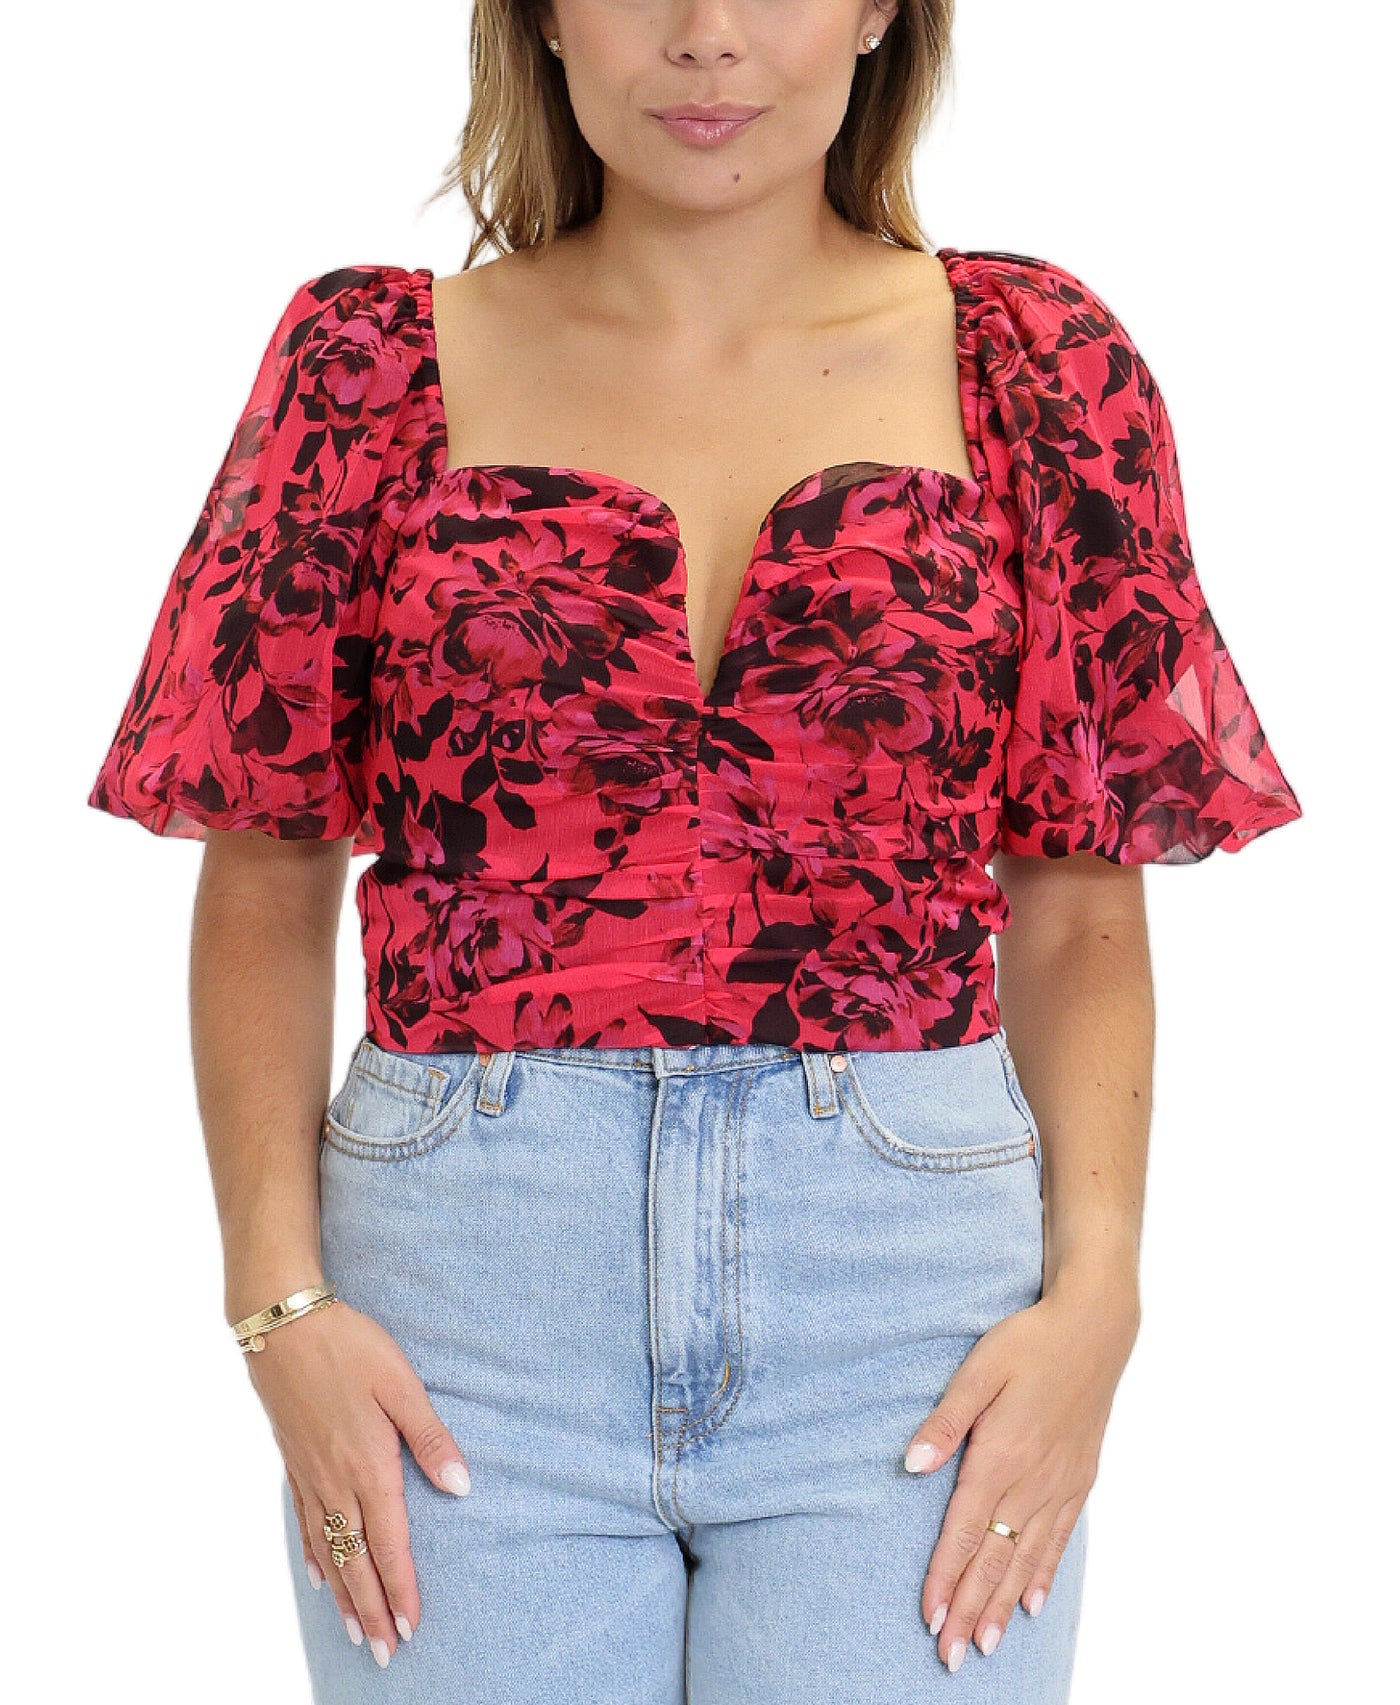 Floral Print Ruched Top image 1